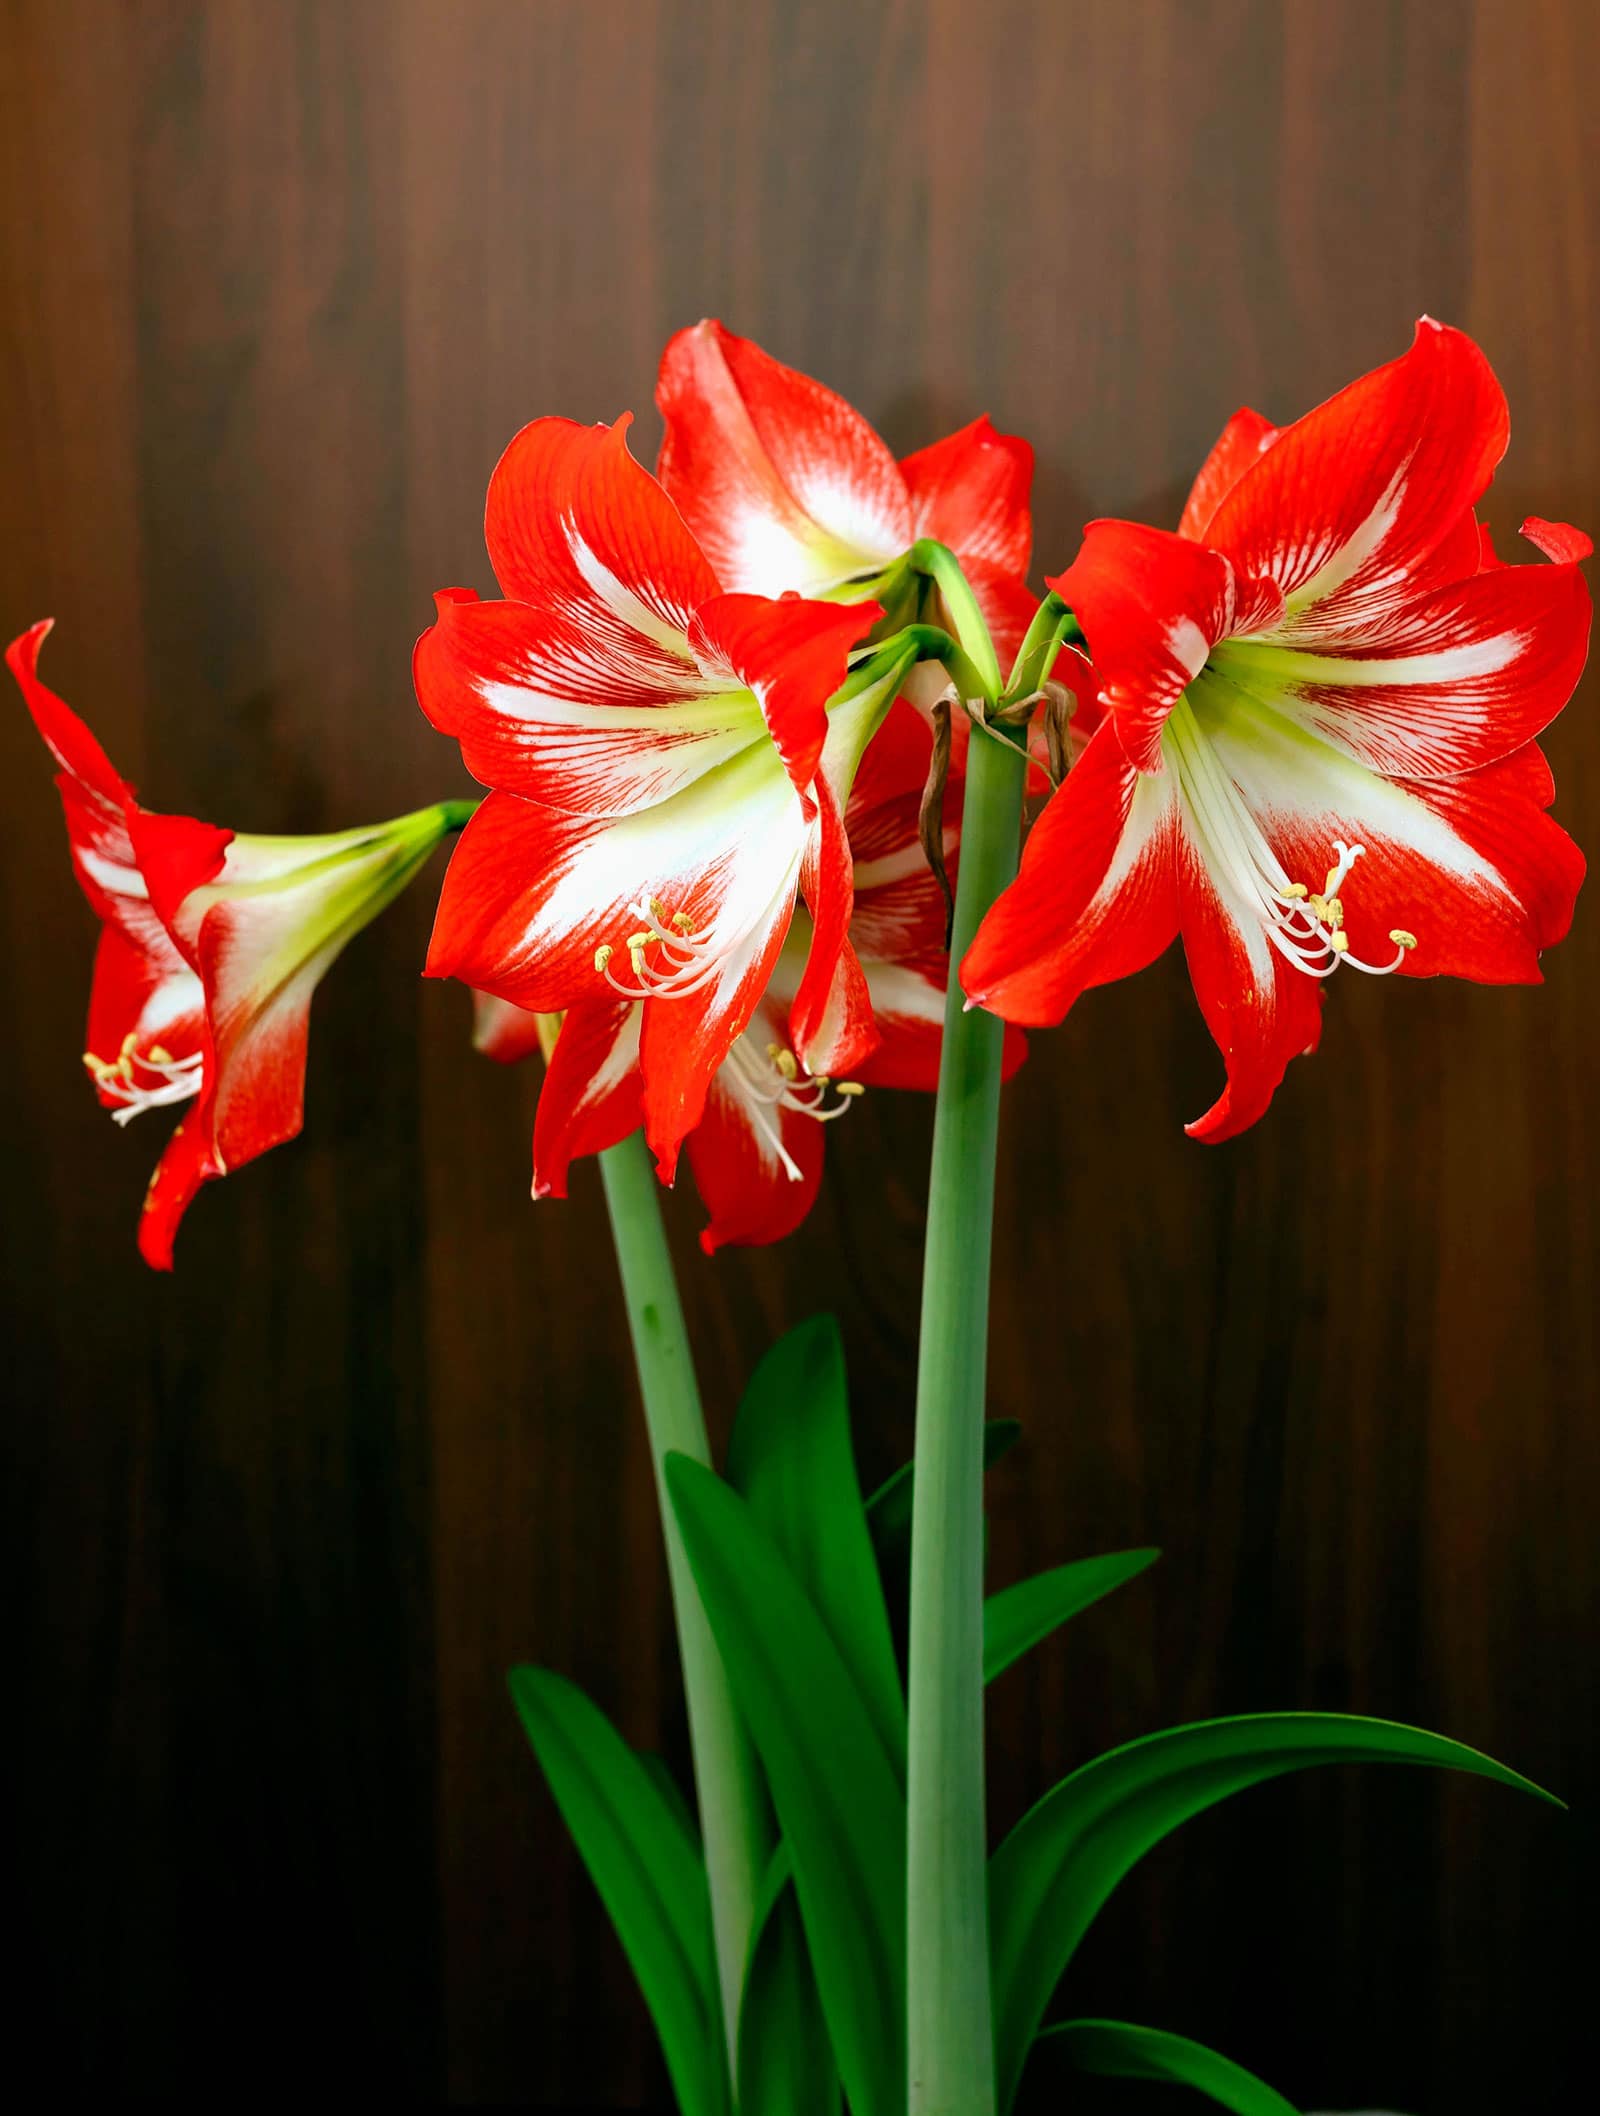 Bold red amaryllis flowers with white throats